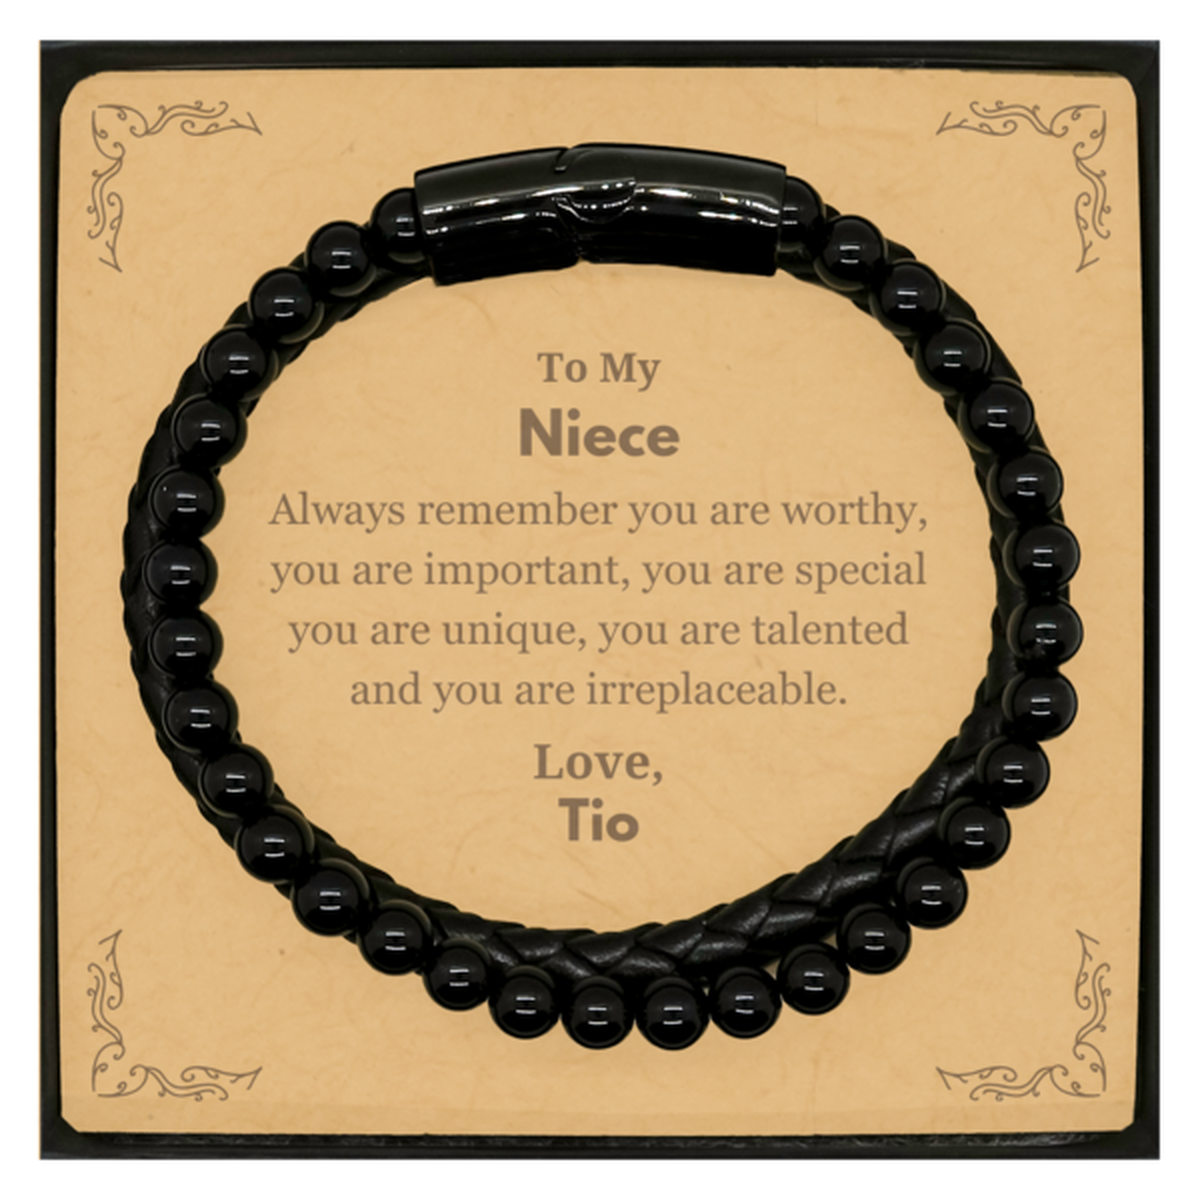 Niece Birthday Gifts from Tio, Inspirational Stone Leather Bracelets for Niece Christmas Graduation Gifts for Niece Always remember you are worthy, you are important. Love, Tio